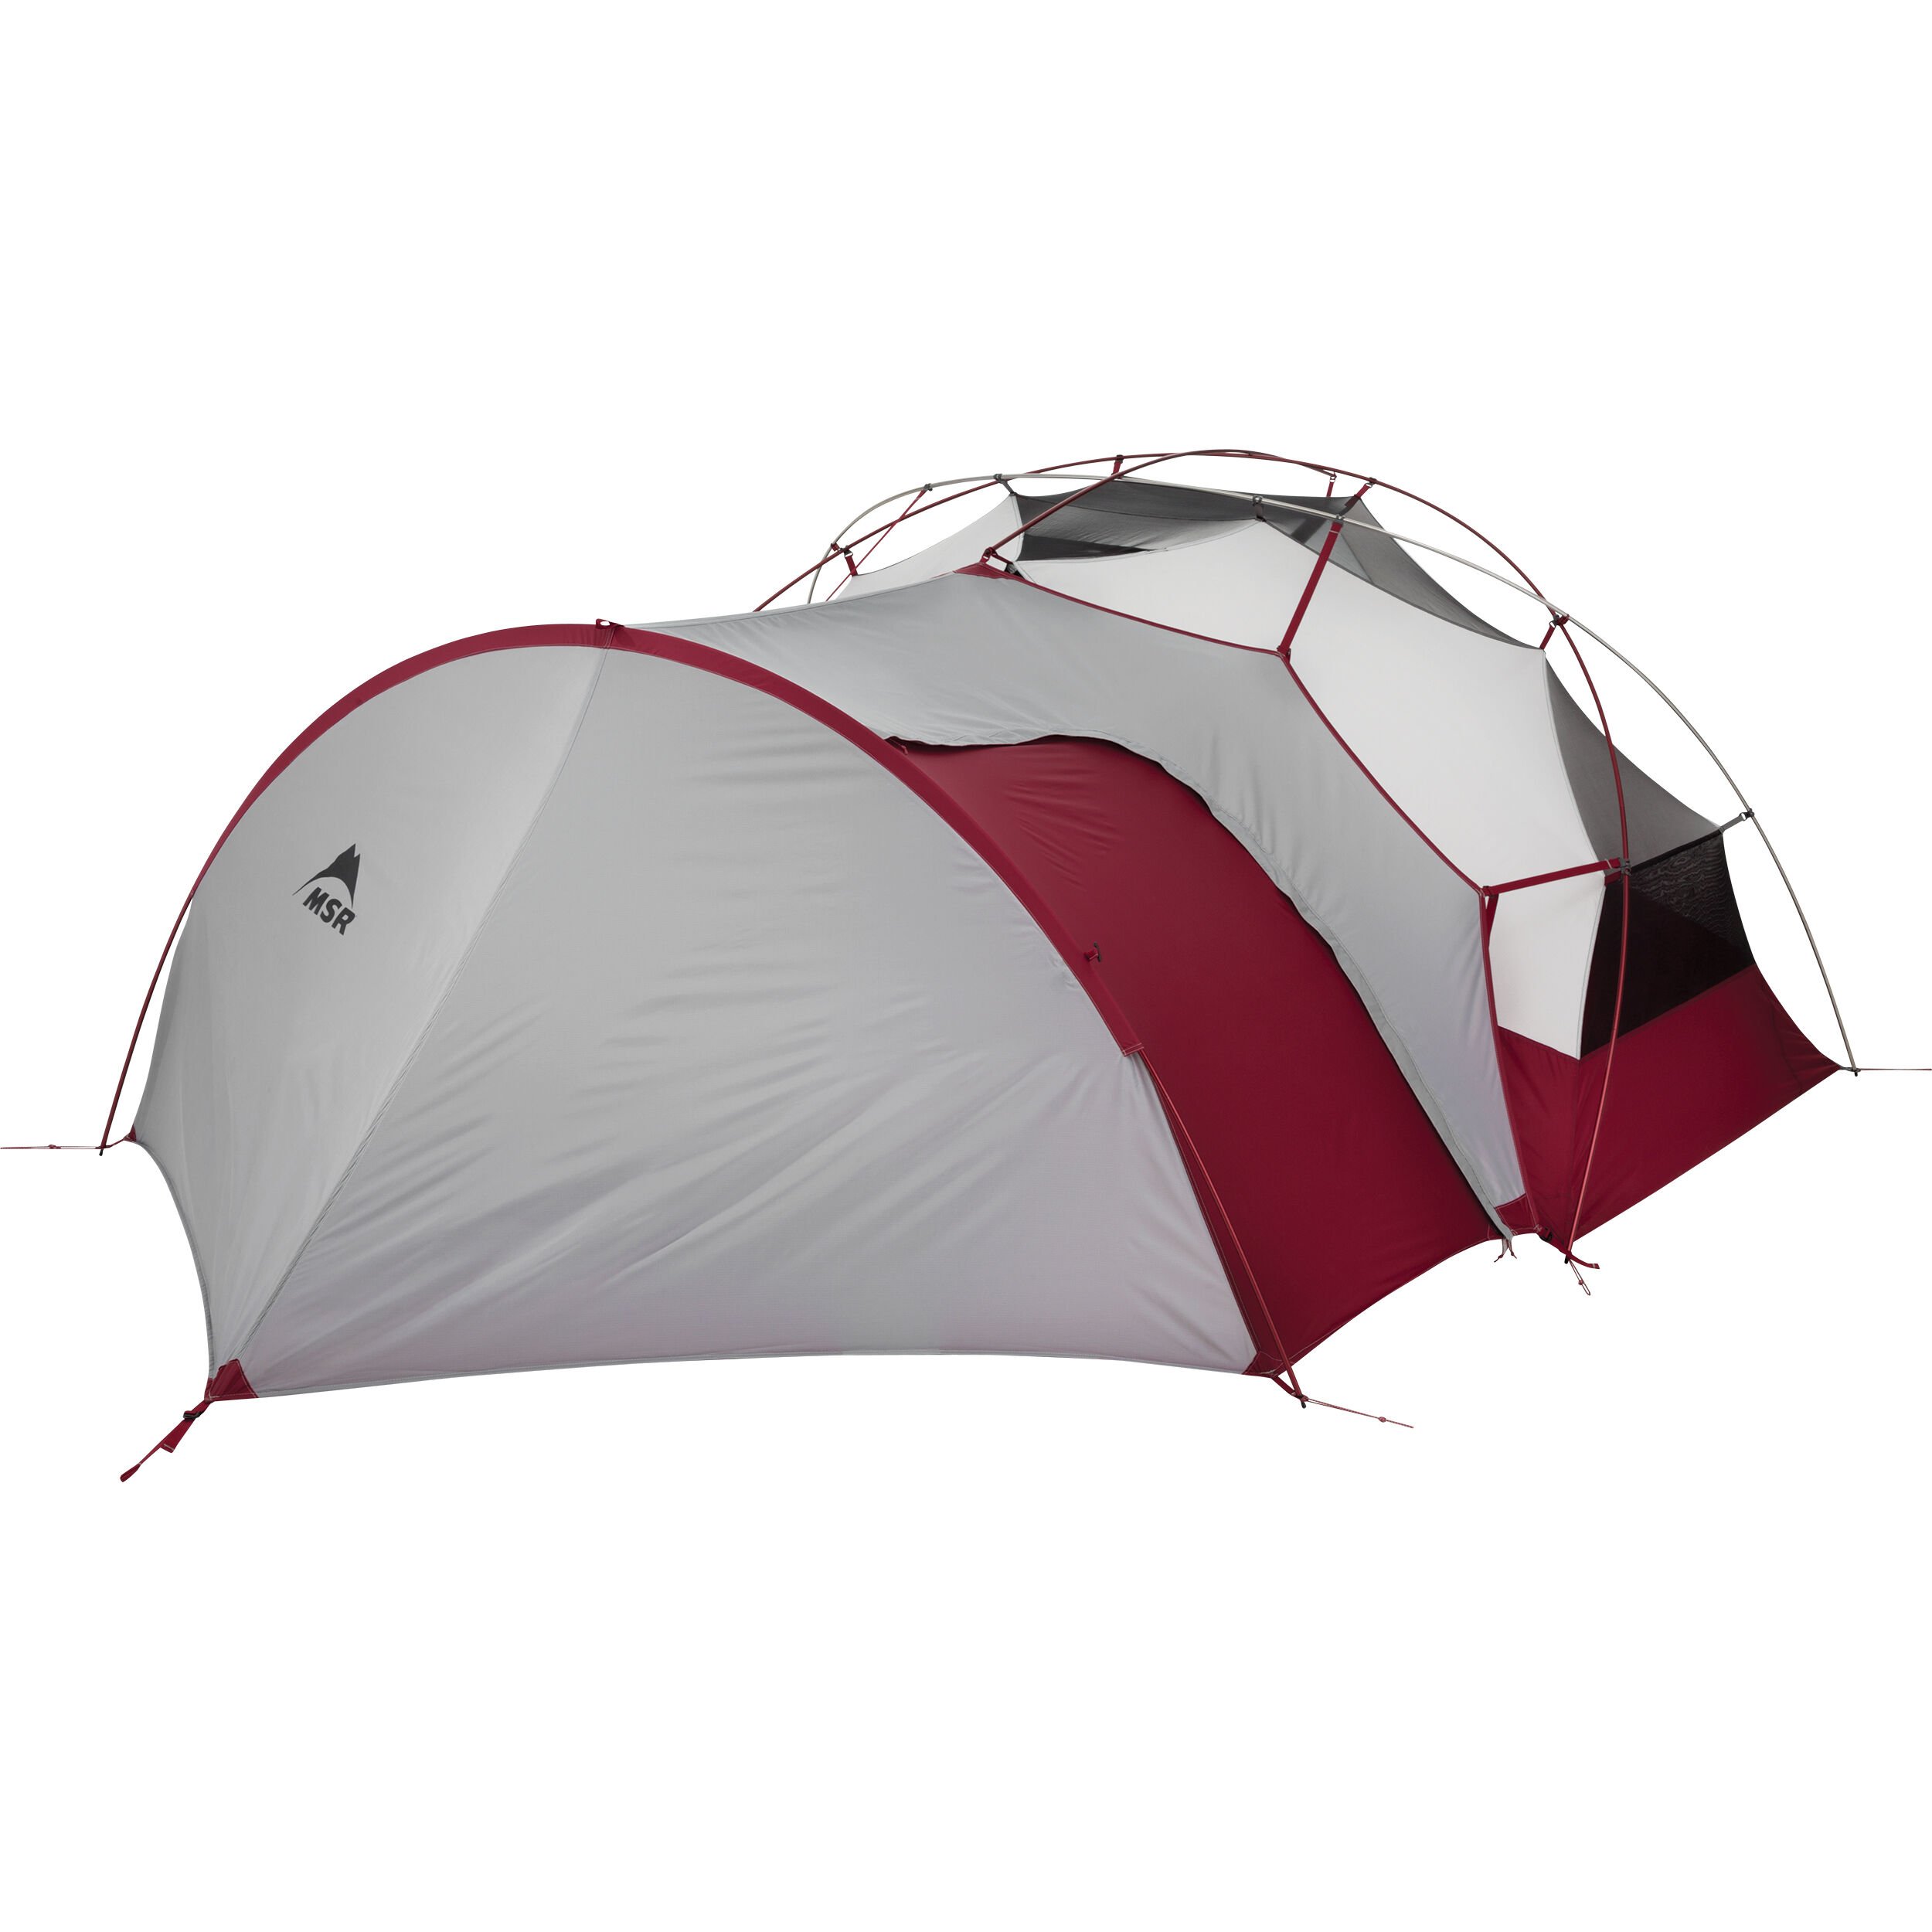 MSR Gear Shed for Elixir™ & Hubba Hubba™ Tent Series